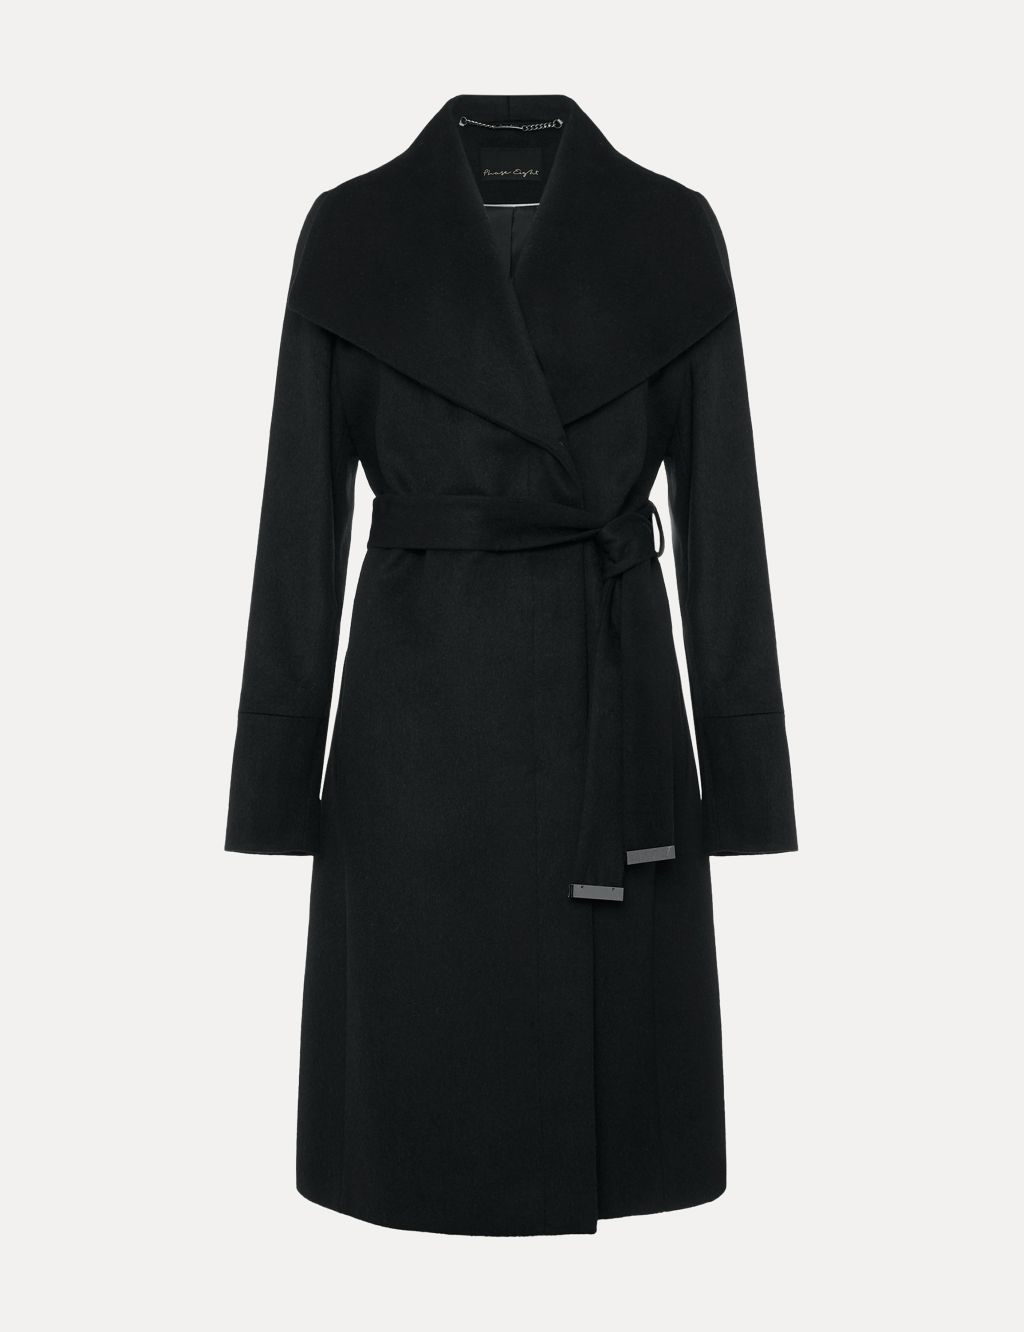 Wool Rich Belted Collared Wrap Coat image 2